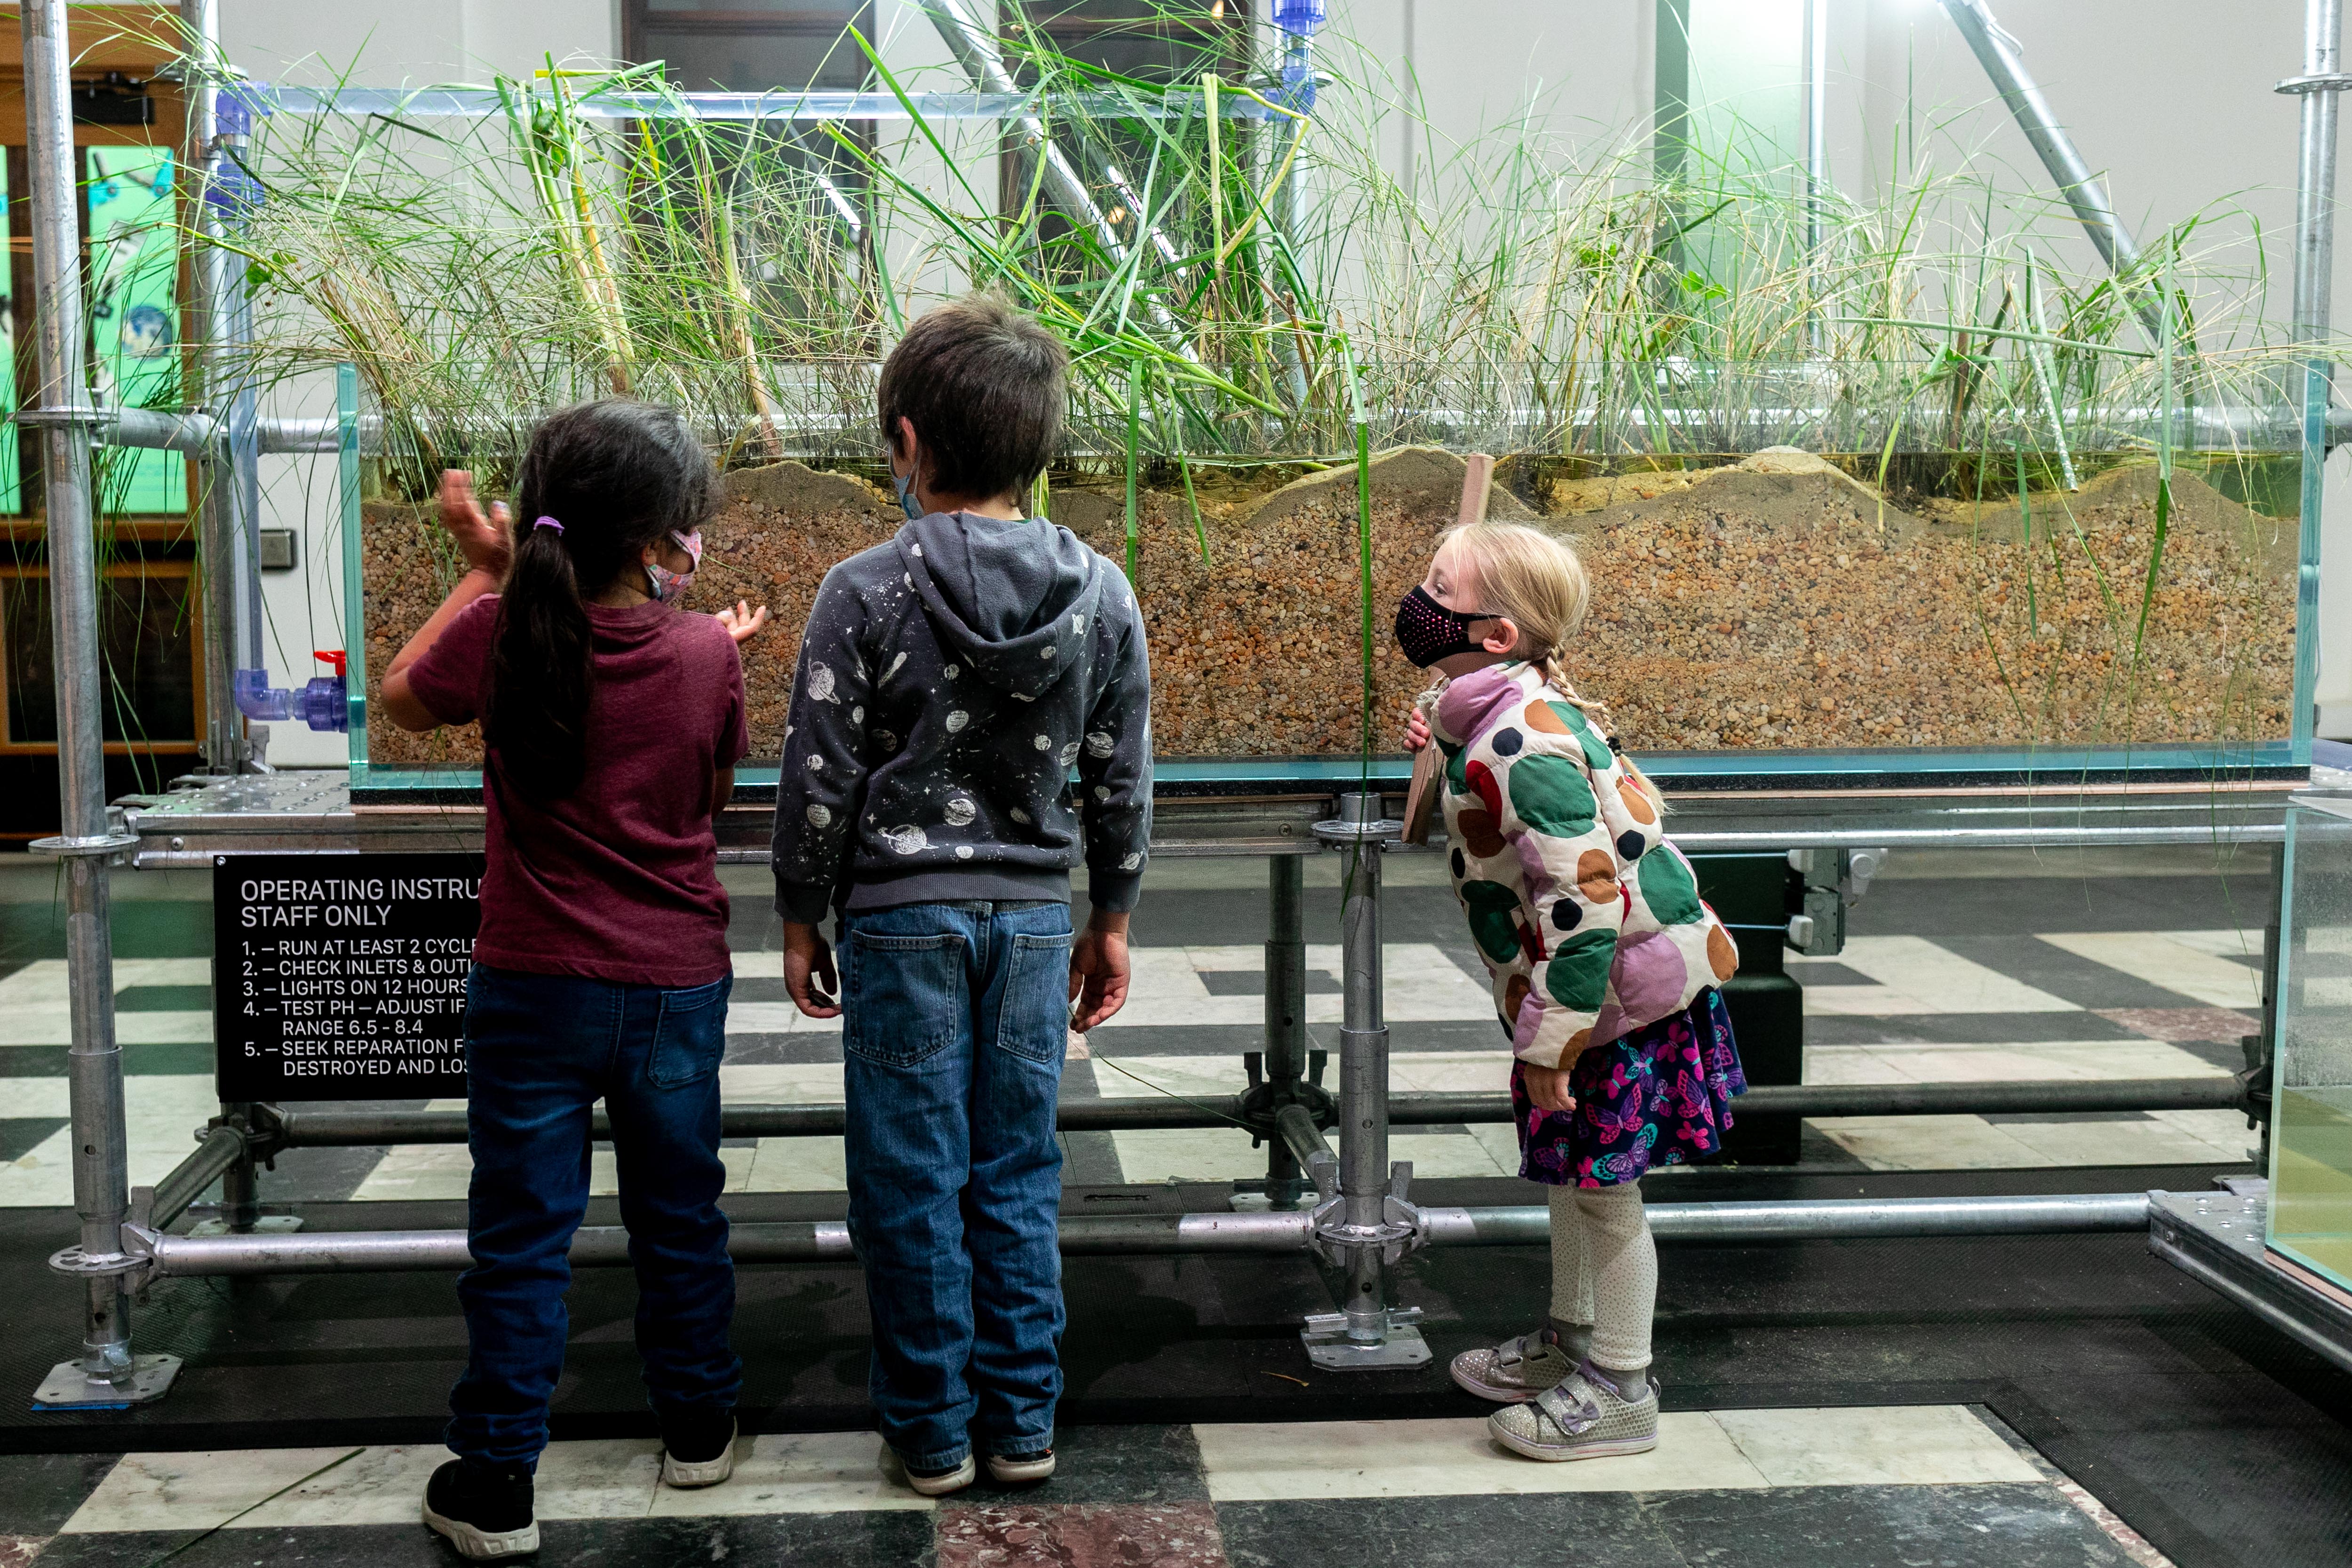 Three young children lean against an exhibition space about plants